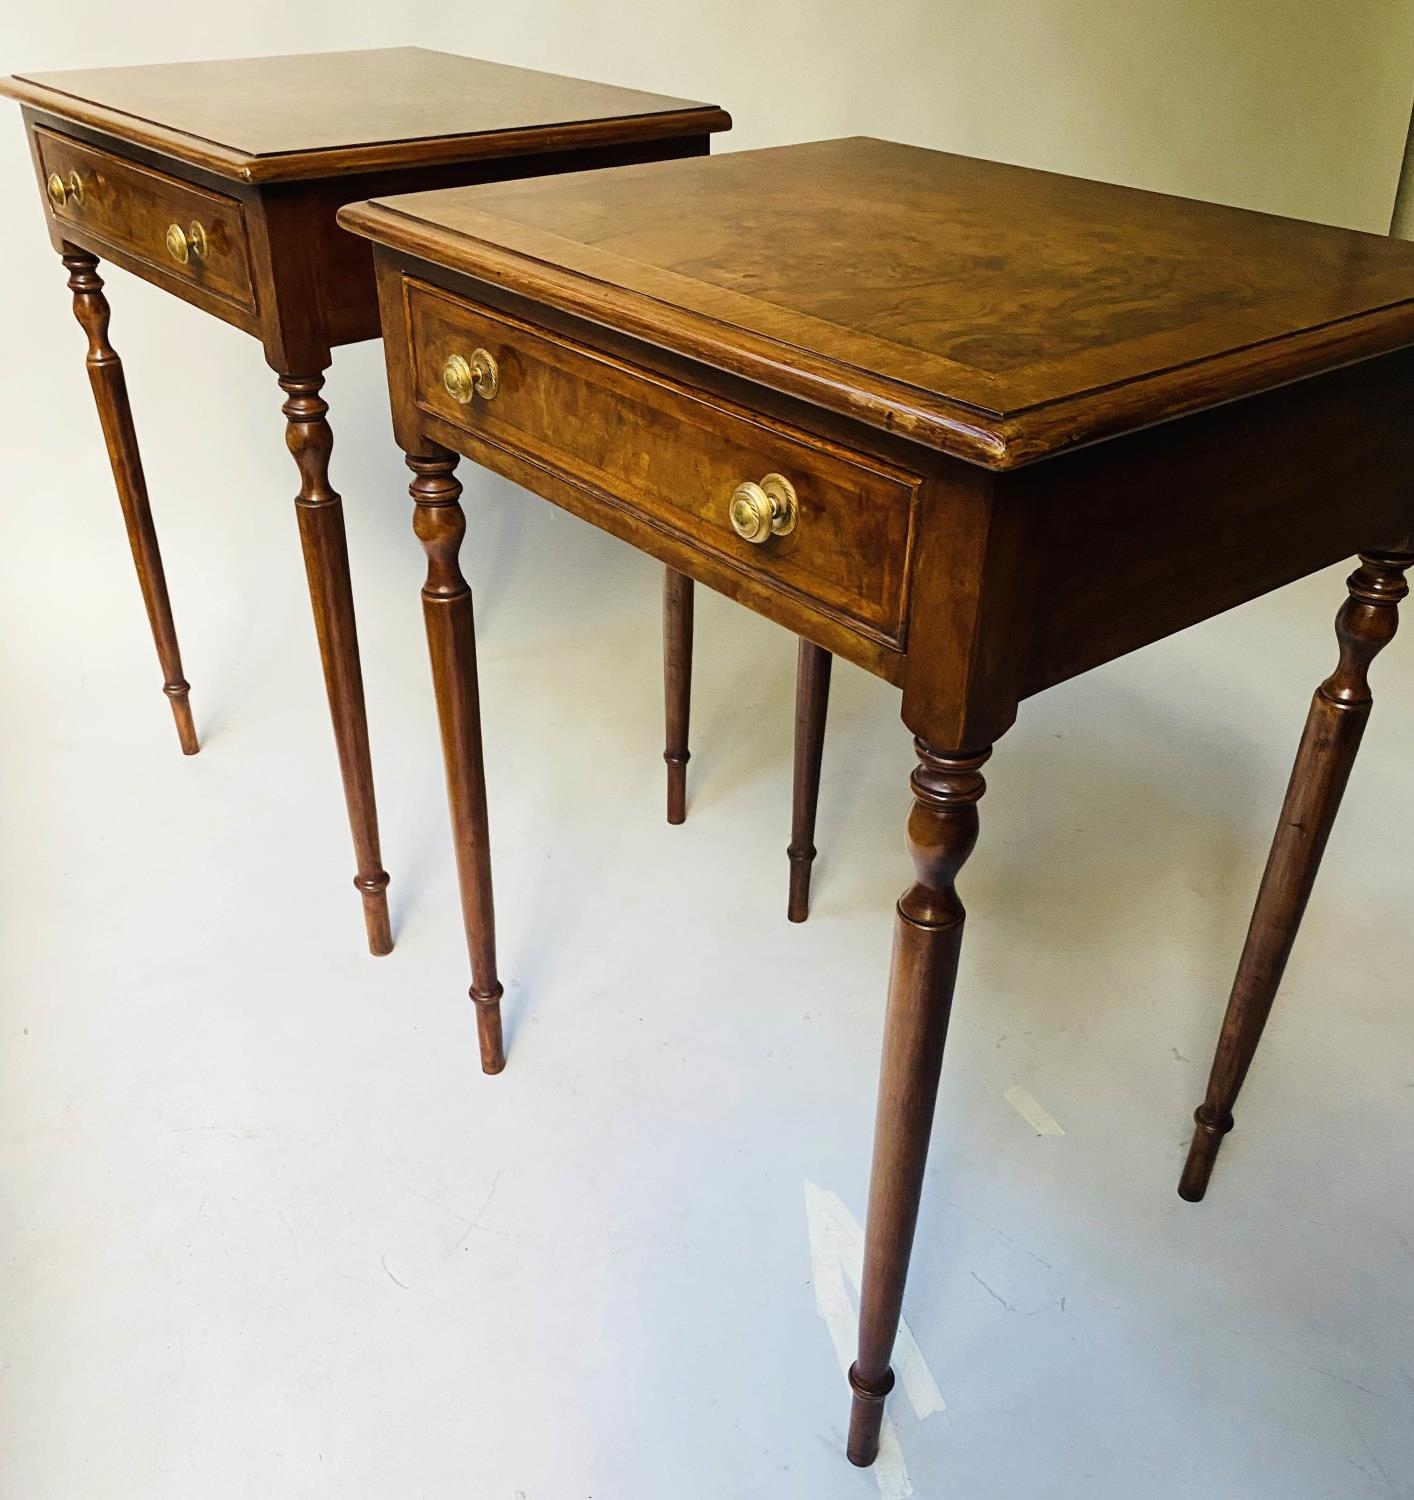 LAMP TABLES, a pair, George III style burr walnut and crossbanded each with a frieze drawer, 58cm - Image 6 of 6